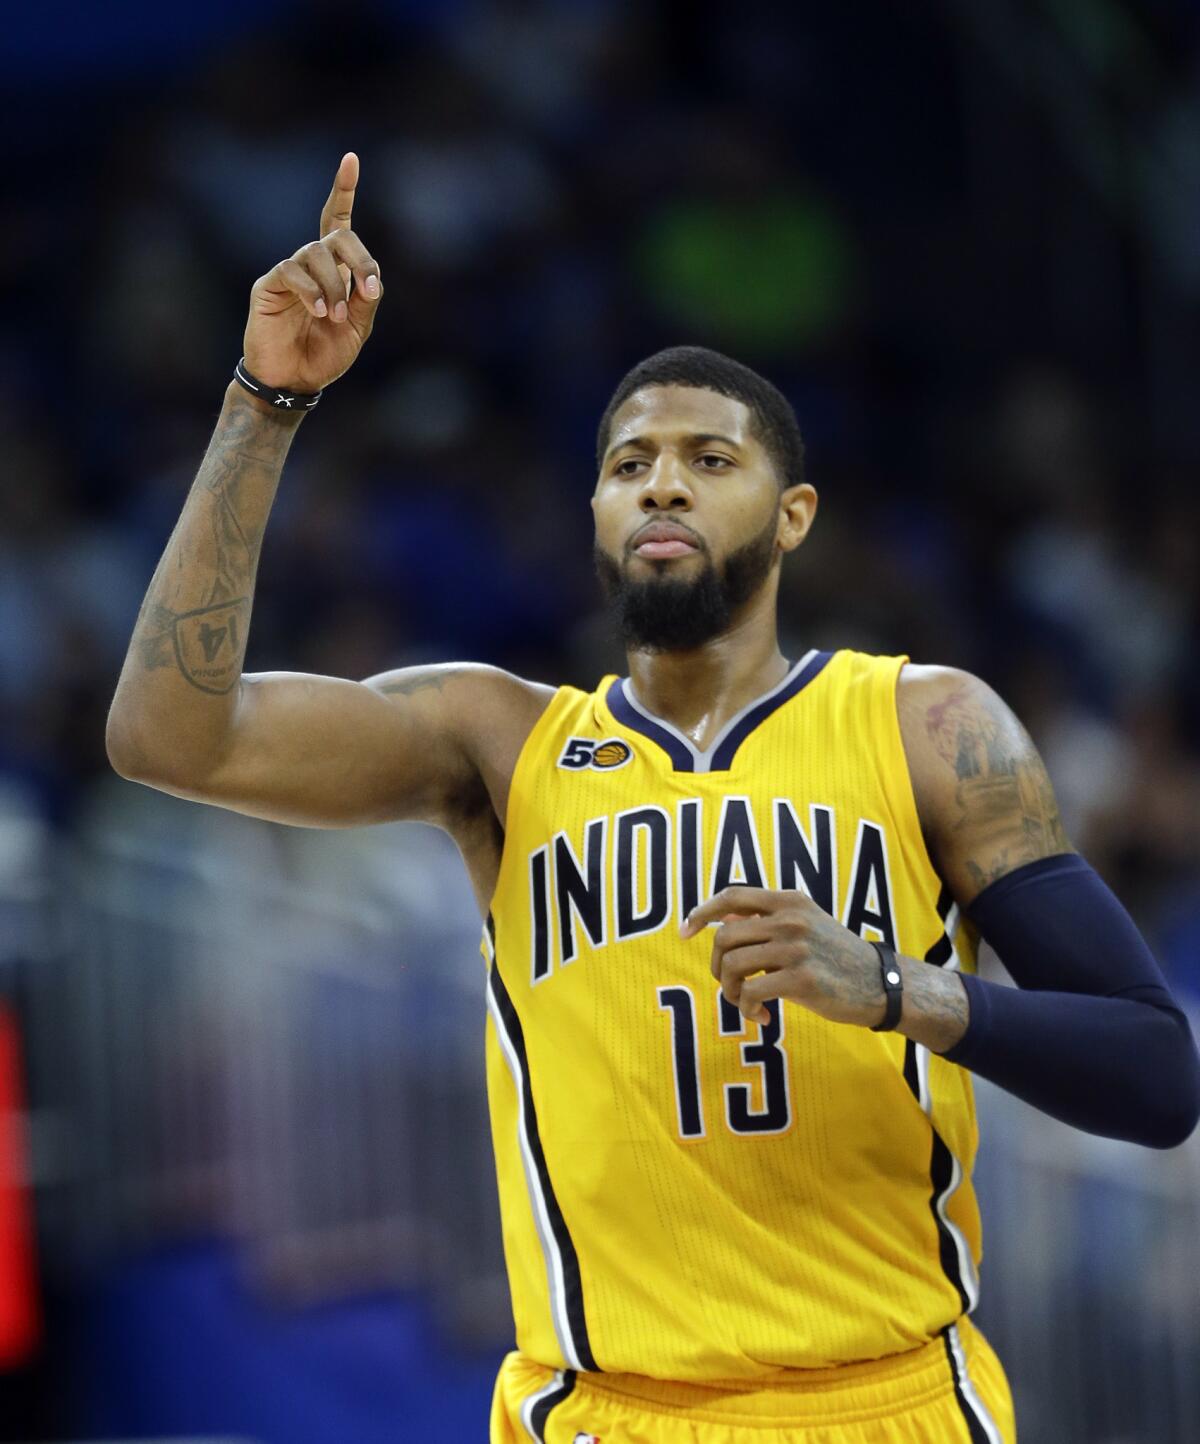 FILE - In this April 8, 2017, file photo, Indiana Pacers' Paul George gestures after making a 3-point basket against the Orlando Magic during an NBA basketball game in Orlando, Fla. George is committed to playing for the Pacers next season. After that, it's anybody's guess. The four-time All-Star forward provided clarity on his short-term plan Thursday before playing in a charity softball game just a short walk away from the only NBA arena he's called home. (AP Photo/John Raoux, File)